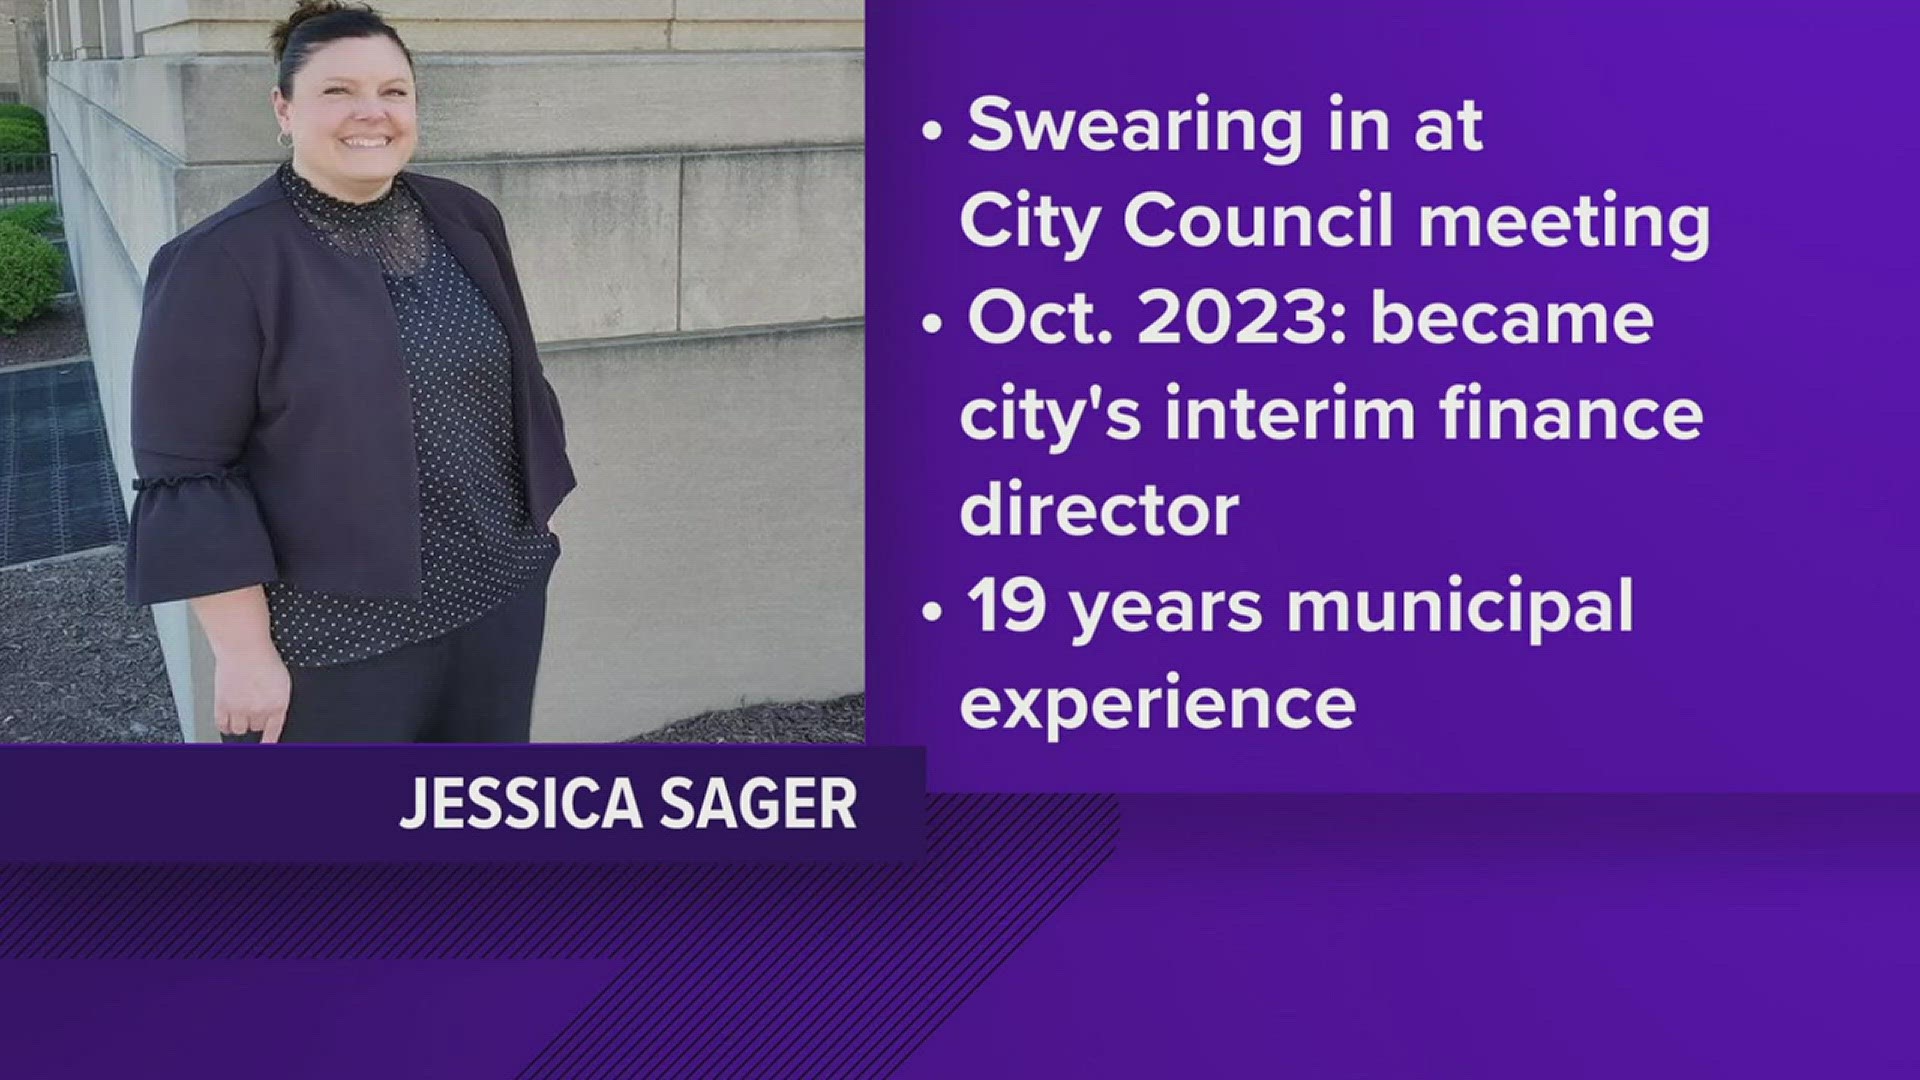 Jessica Sager has worked for the City for two years, including as finance manager and interim finance director.